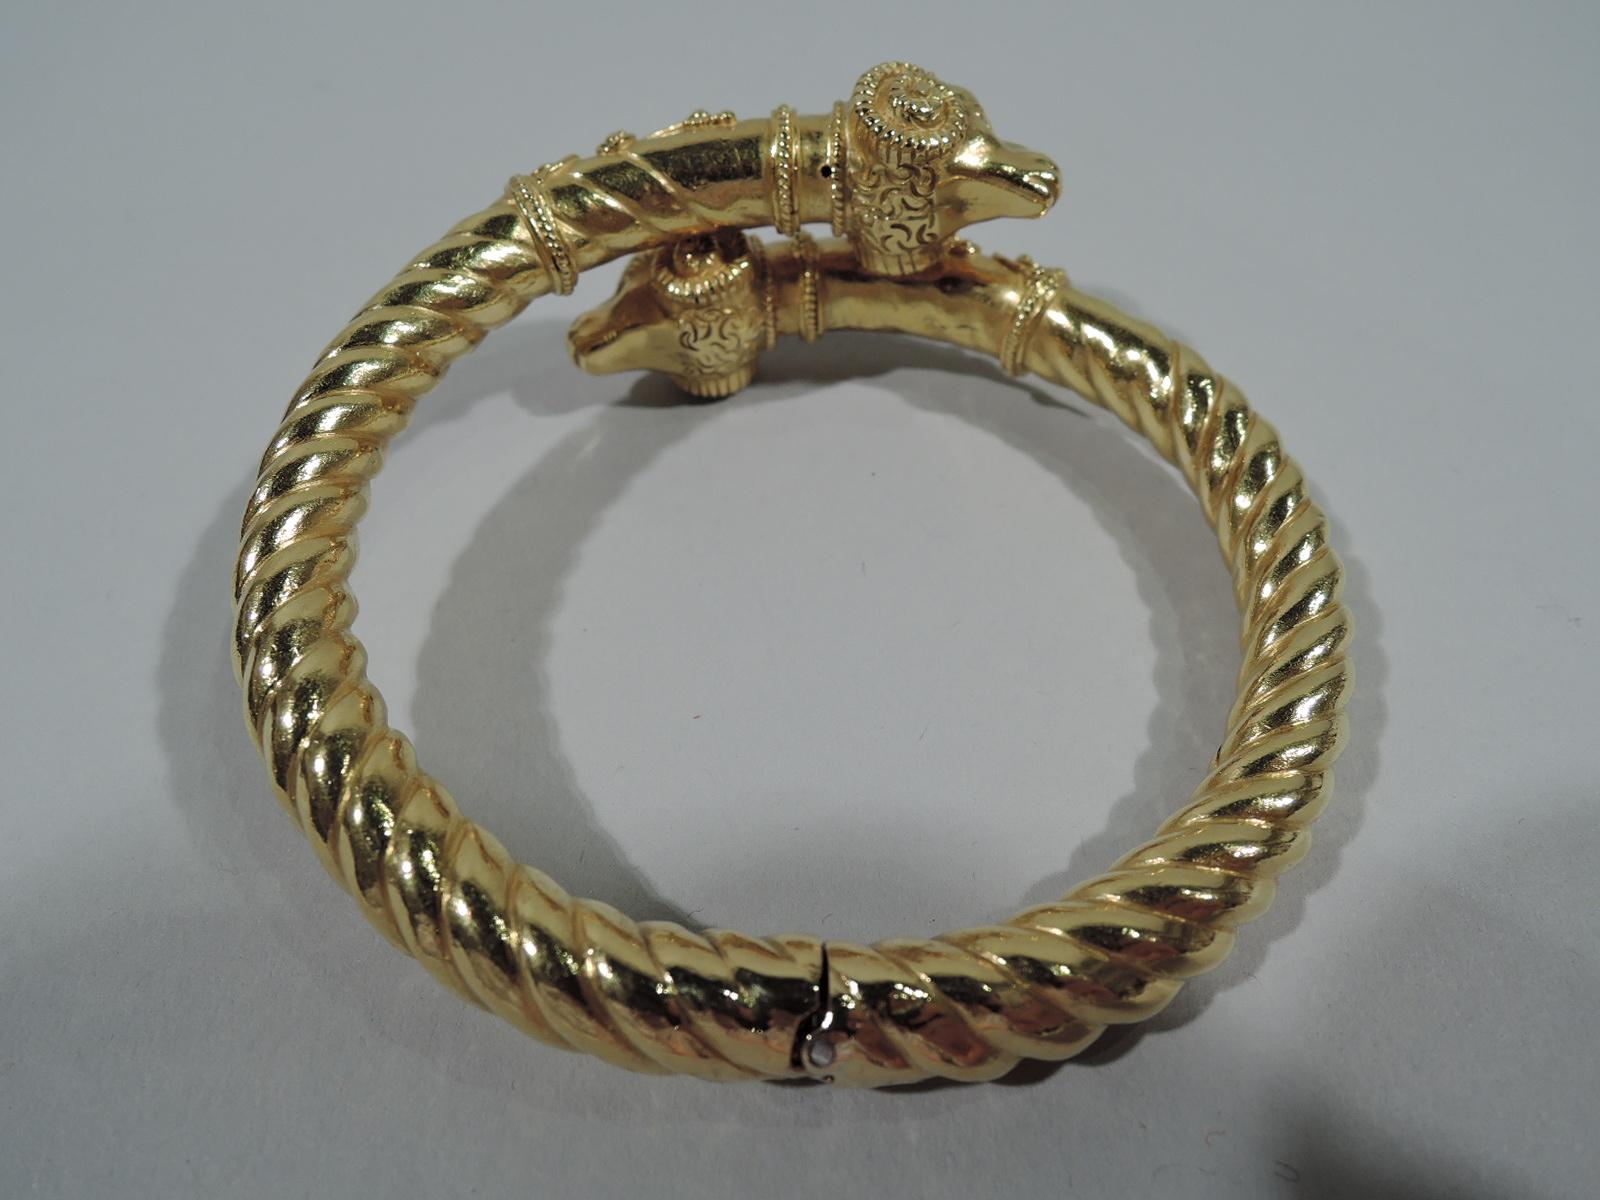 A beautifully crafted Etruscan-Revival 18K gold bangle bracelet with 2 ramâ€™s heads decorated with filigree bead work, floral filigree collars, and rope band. Italy, ca. 1890. Fits a medium wrist.

Circumference interior: 6 3/4 in. Weight: 31.8